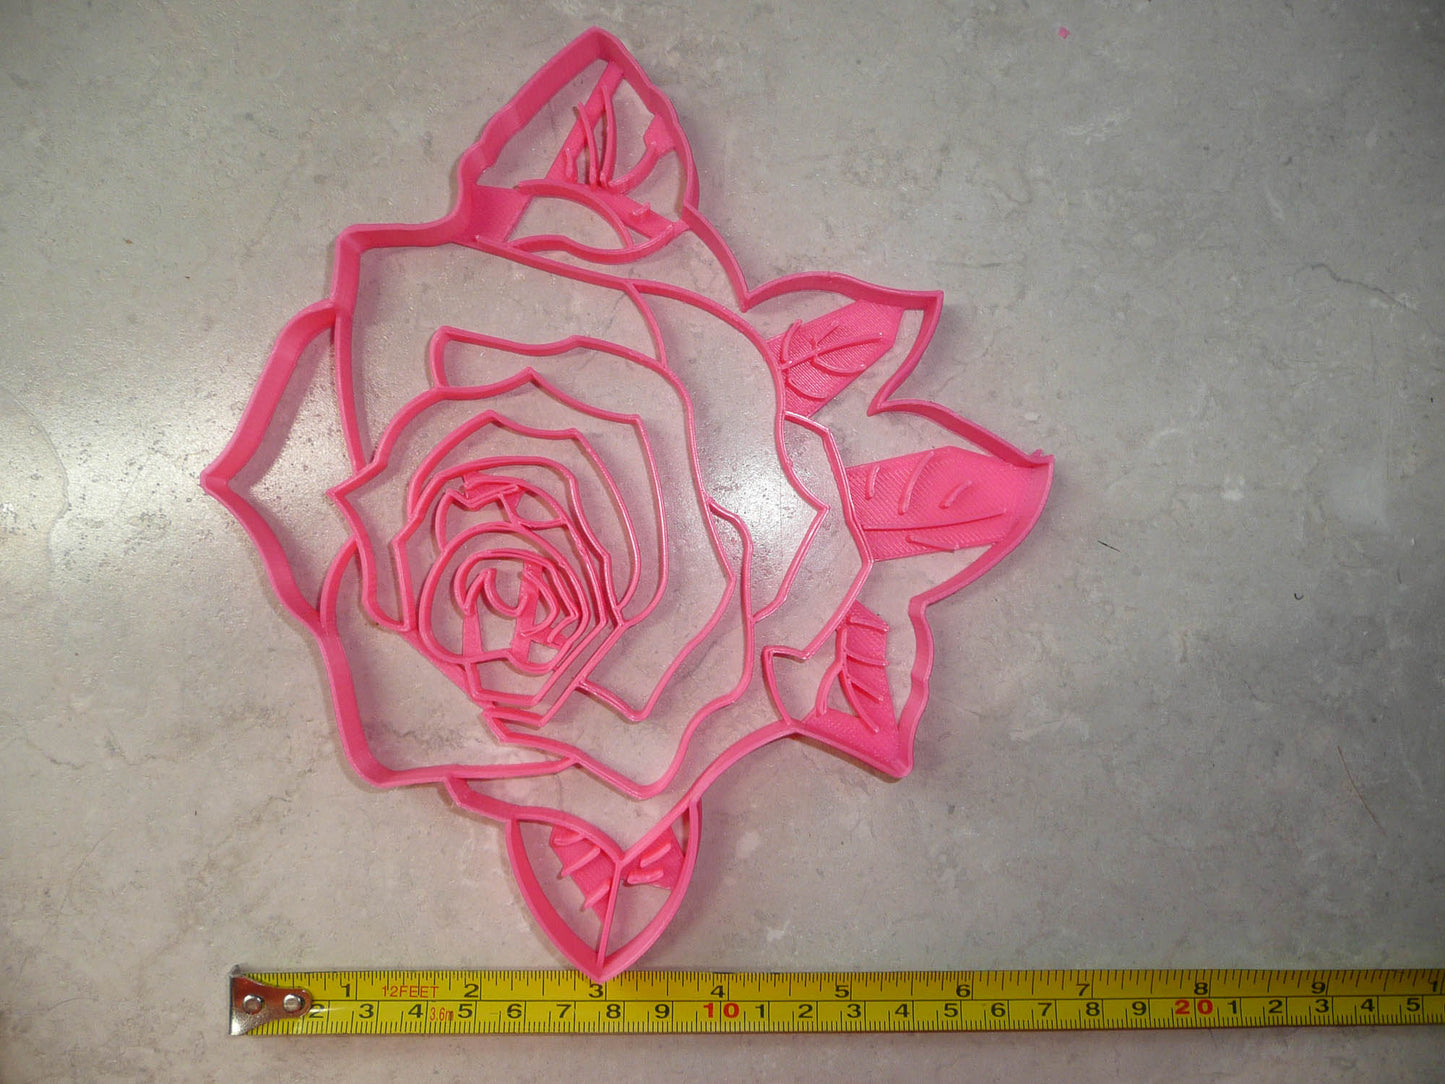 Rose Flower 7.5 Inch Pie Top Topper Design Or Large Cookie Cutter USA PR3314